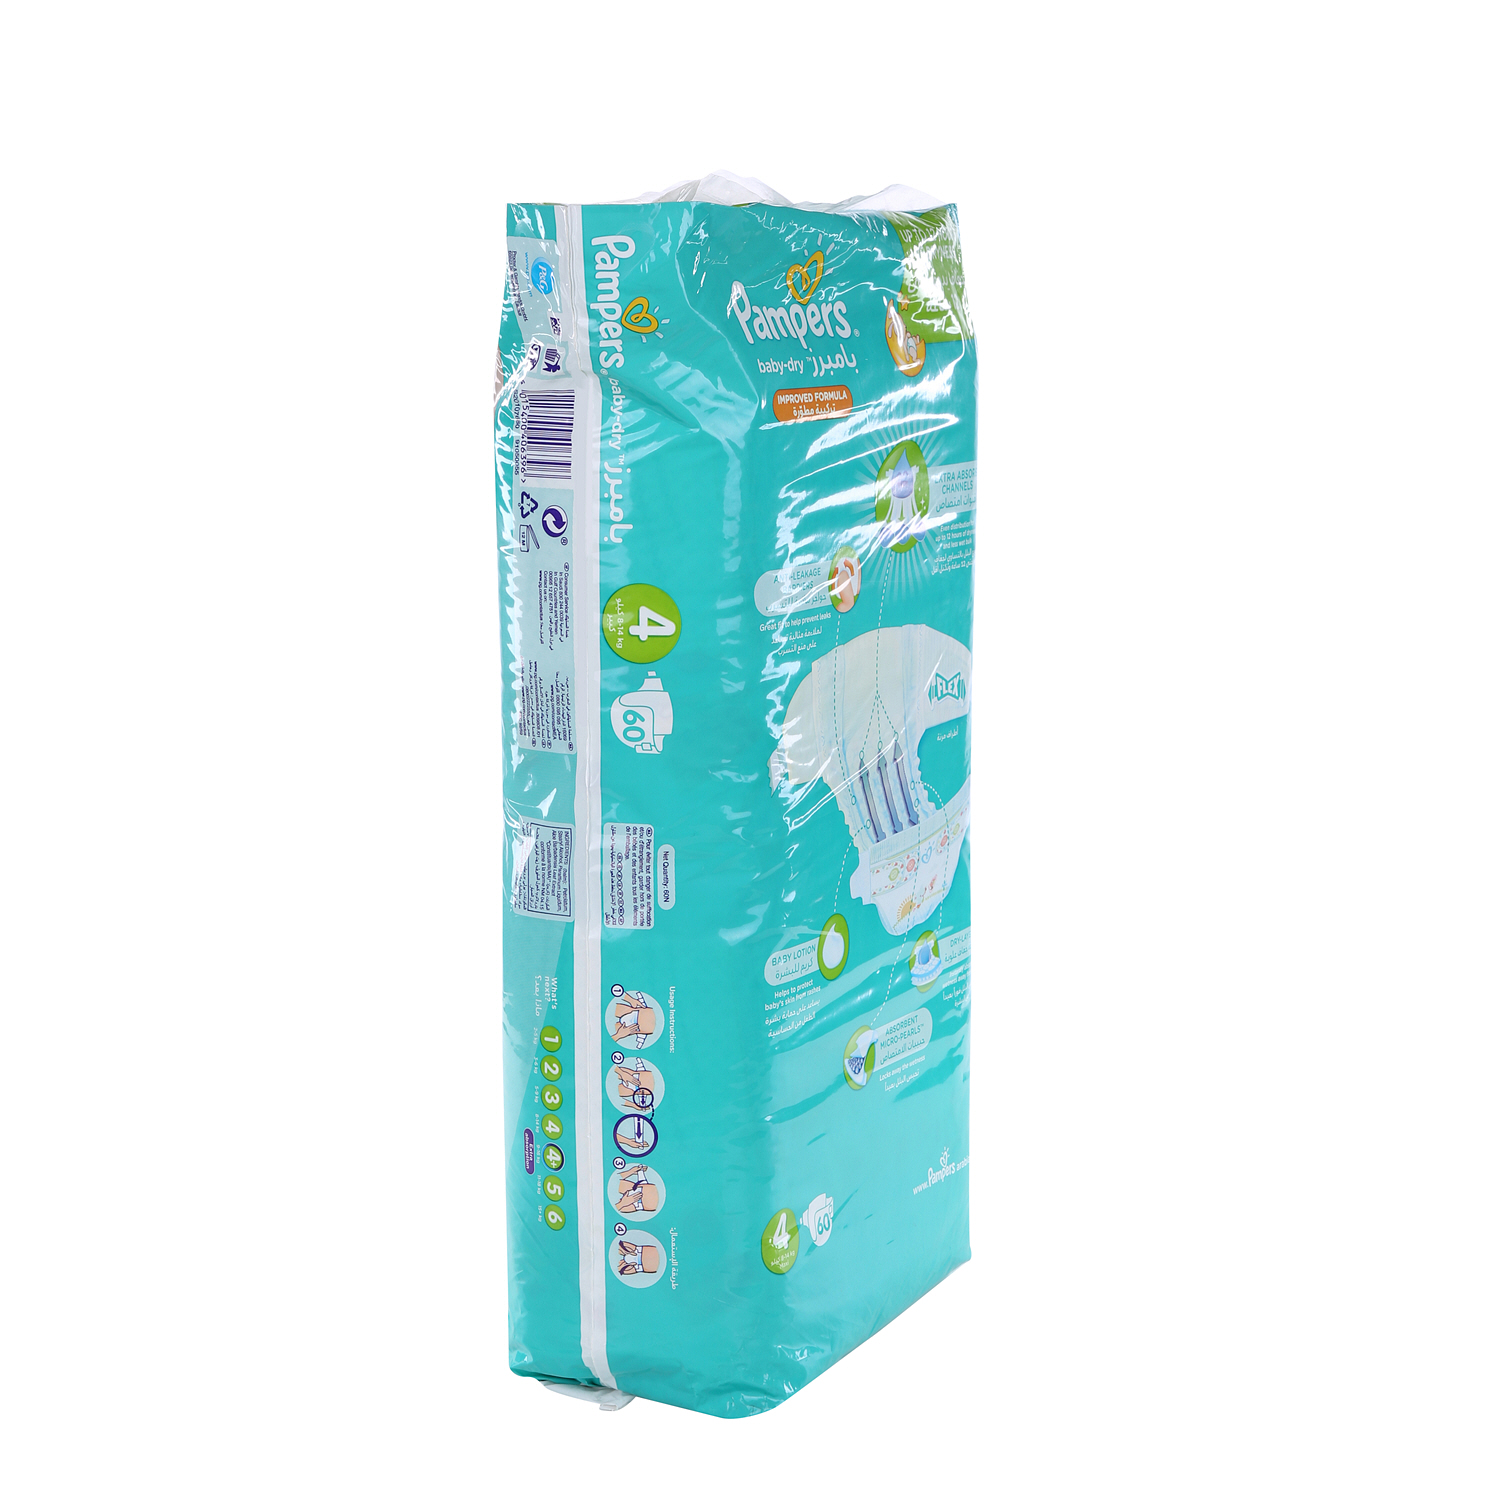 Pampers Baby Dry Jumbo Pack Maxi 60'S